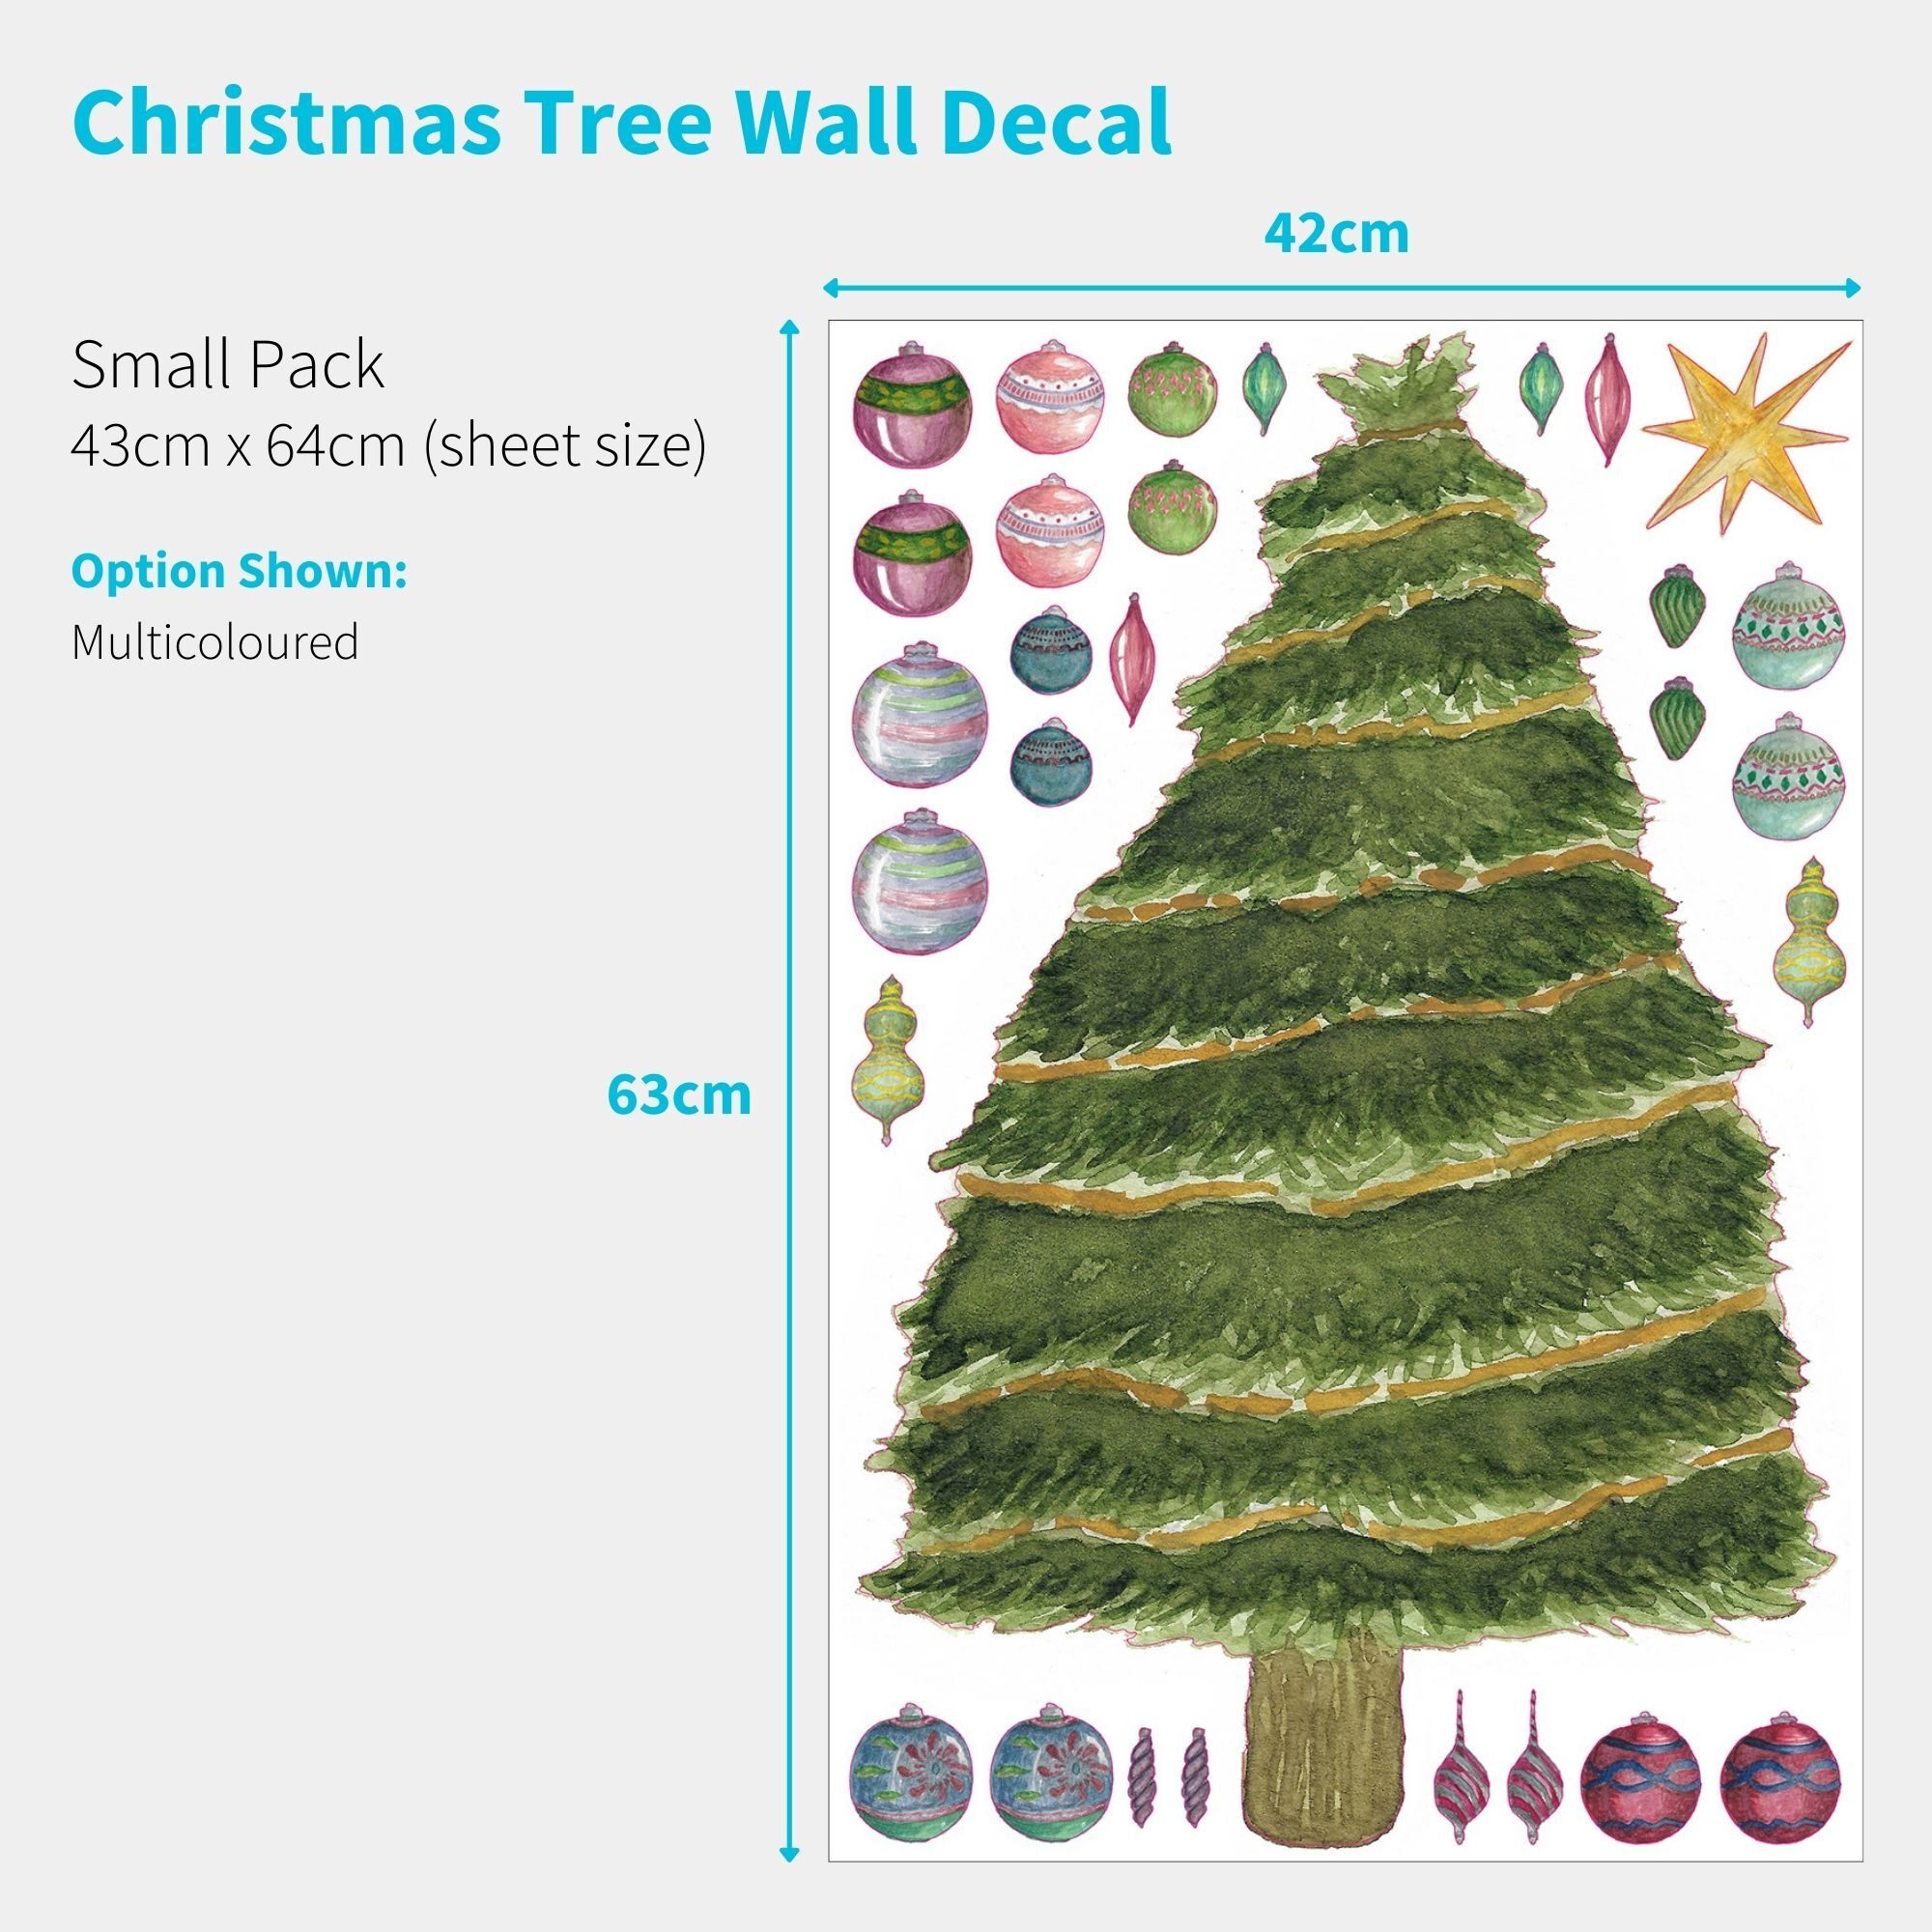 Christmas Tree - A Small pack